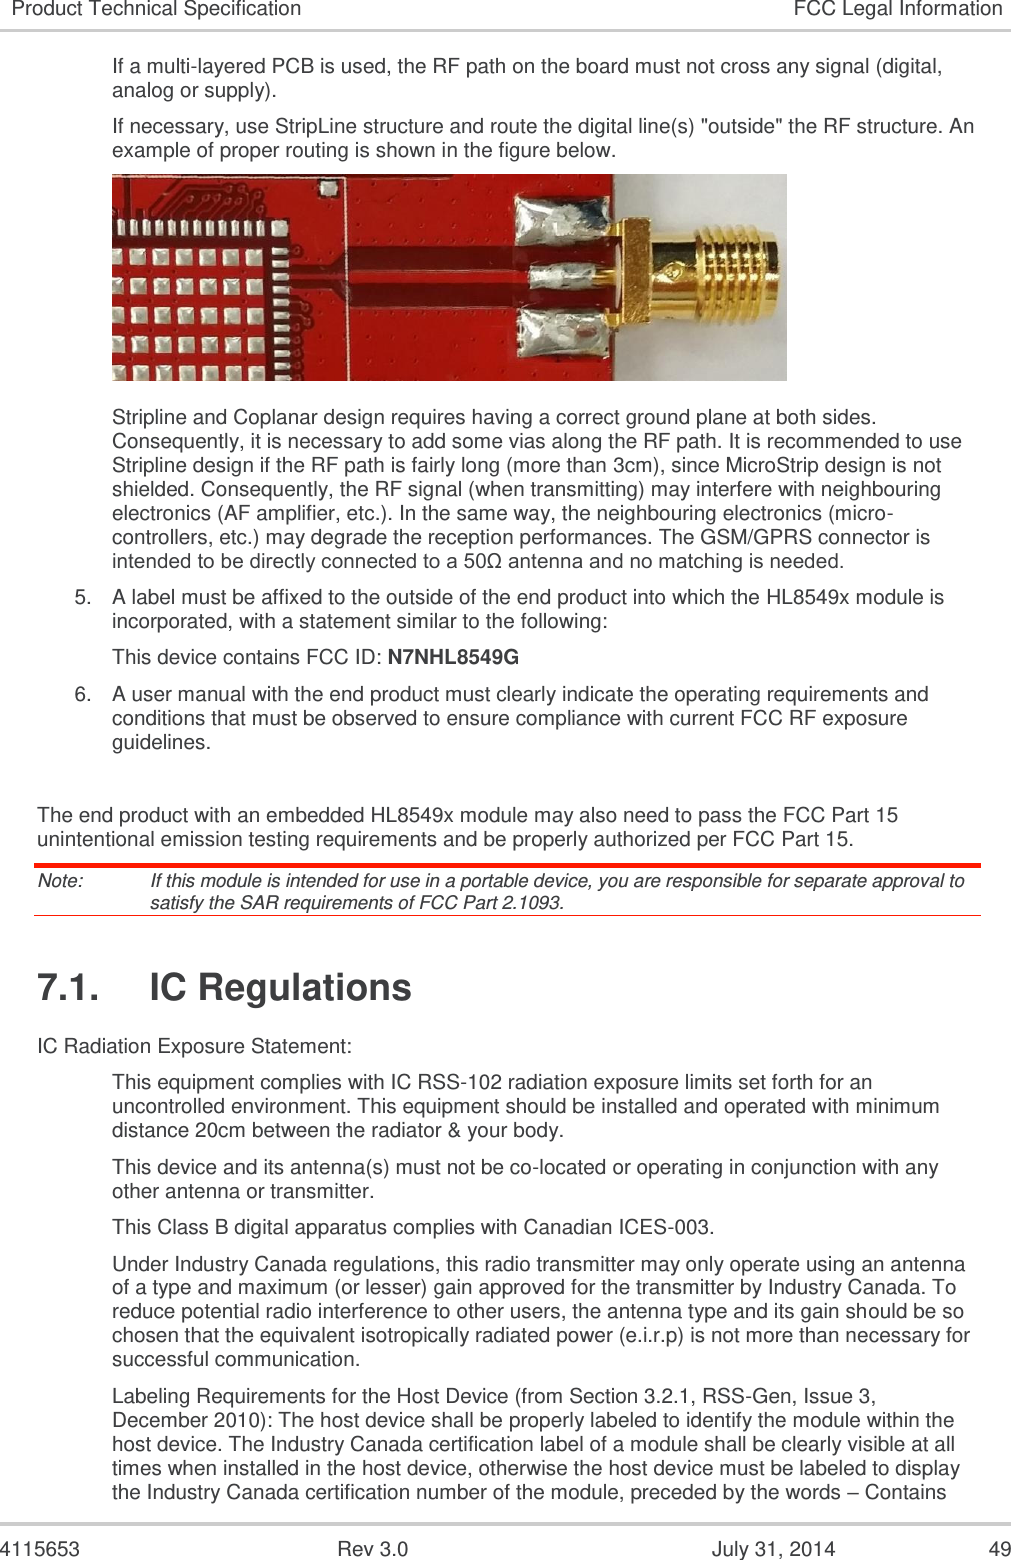  4115653  Rev 3.0  July 31, 2014  49 Product Technical Specification FCC Legal Information If a multi-layered PCB is used, the RF path on the board must not cross any signal (digital, analog or supply).  If necessary, use StripLine structure and route the digital line(s) &quot;outside&quot; the RF structure. An example of proper routing is shown in the figure below.   Stripline and Coplanar design requires having a correct ground plane at both sides. Consequently, it is necessary to add some vias along the RF path. It is recommended to use Stripline design if the RF path is fairly long (more than 3cm), since MicroStrip design is not shielded. Consequently, the RF signal (when transmitting) may interfere with neighbouring electronics (AF amplifier, etc.). In the same way, the neighbouring electronics (micro-controllers, etc.) may degrade the reception performances. The GSM/GPRS connector is intended to be directly connected to a 50Ω antenna and no matching is needed. 5. A label must be affixed to the outside of the end product into which the HL8549x module is incorporated, with a statement similar to the following: This device contains FCC ID: N7NHL8549G 6. A user manual with the end product must clearly indicate the operating requirements and conditions that must be observed to ensure compliance with current FCC RF exposure guidelines.  The end product with an embedded HL8549x module may also need to pass the FCC Part 15 unintentional emission testing requirements and be properly authorized per FCC Part 15. Note:   If this module is intended for use in a portable device, you are responsible for separate approval to satisfy the SAR requirements of FCC Part 2.1093. 7.1.  IC Regulations IC Radiation Exposure Statement: This equipment complies with IC RSS-102 radiation exposure limits set forth for an uncontrolled environment. This equipment should be installed and operated with minimum distance 20cm between the radiator &amp; your body. This device and its antenna(s) must not be co-located or operating in conjunction with any other antenna or transmitter. This Class B digital apparatus complies with Canadian ICES-003. Under Industry Canada regulations, this radio transmitter may only operate using an antenna of a type and maximum (or lesser) gain approved for the transmitter by Industry Canada. To reduce potential radio interference to other users, the antenna type and its gain should be so chosen that the equivalent isotropically radiated power (e.i.r.p) is not more than necessary for successful communication. Labeling Requirements for the Host Device (from Section 3.2.1, RSS-Gen, Issue 3, December 2010): The host device shall be properly labeled to identify the module within the host device. The Industry Canada certification label of a module shall be clearly visible at all times when installed in the host device, otherwise the host device must be labeled to display the Industry Canada certification number of the module, preceded by the words – Contains 